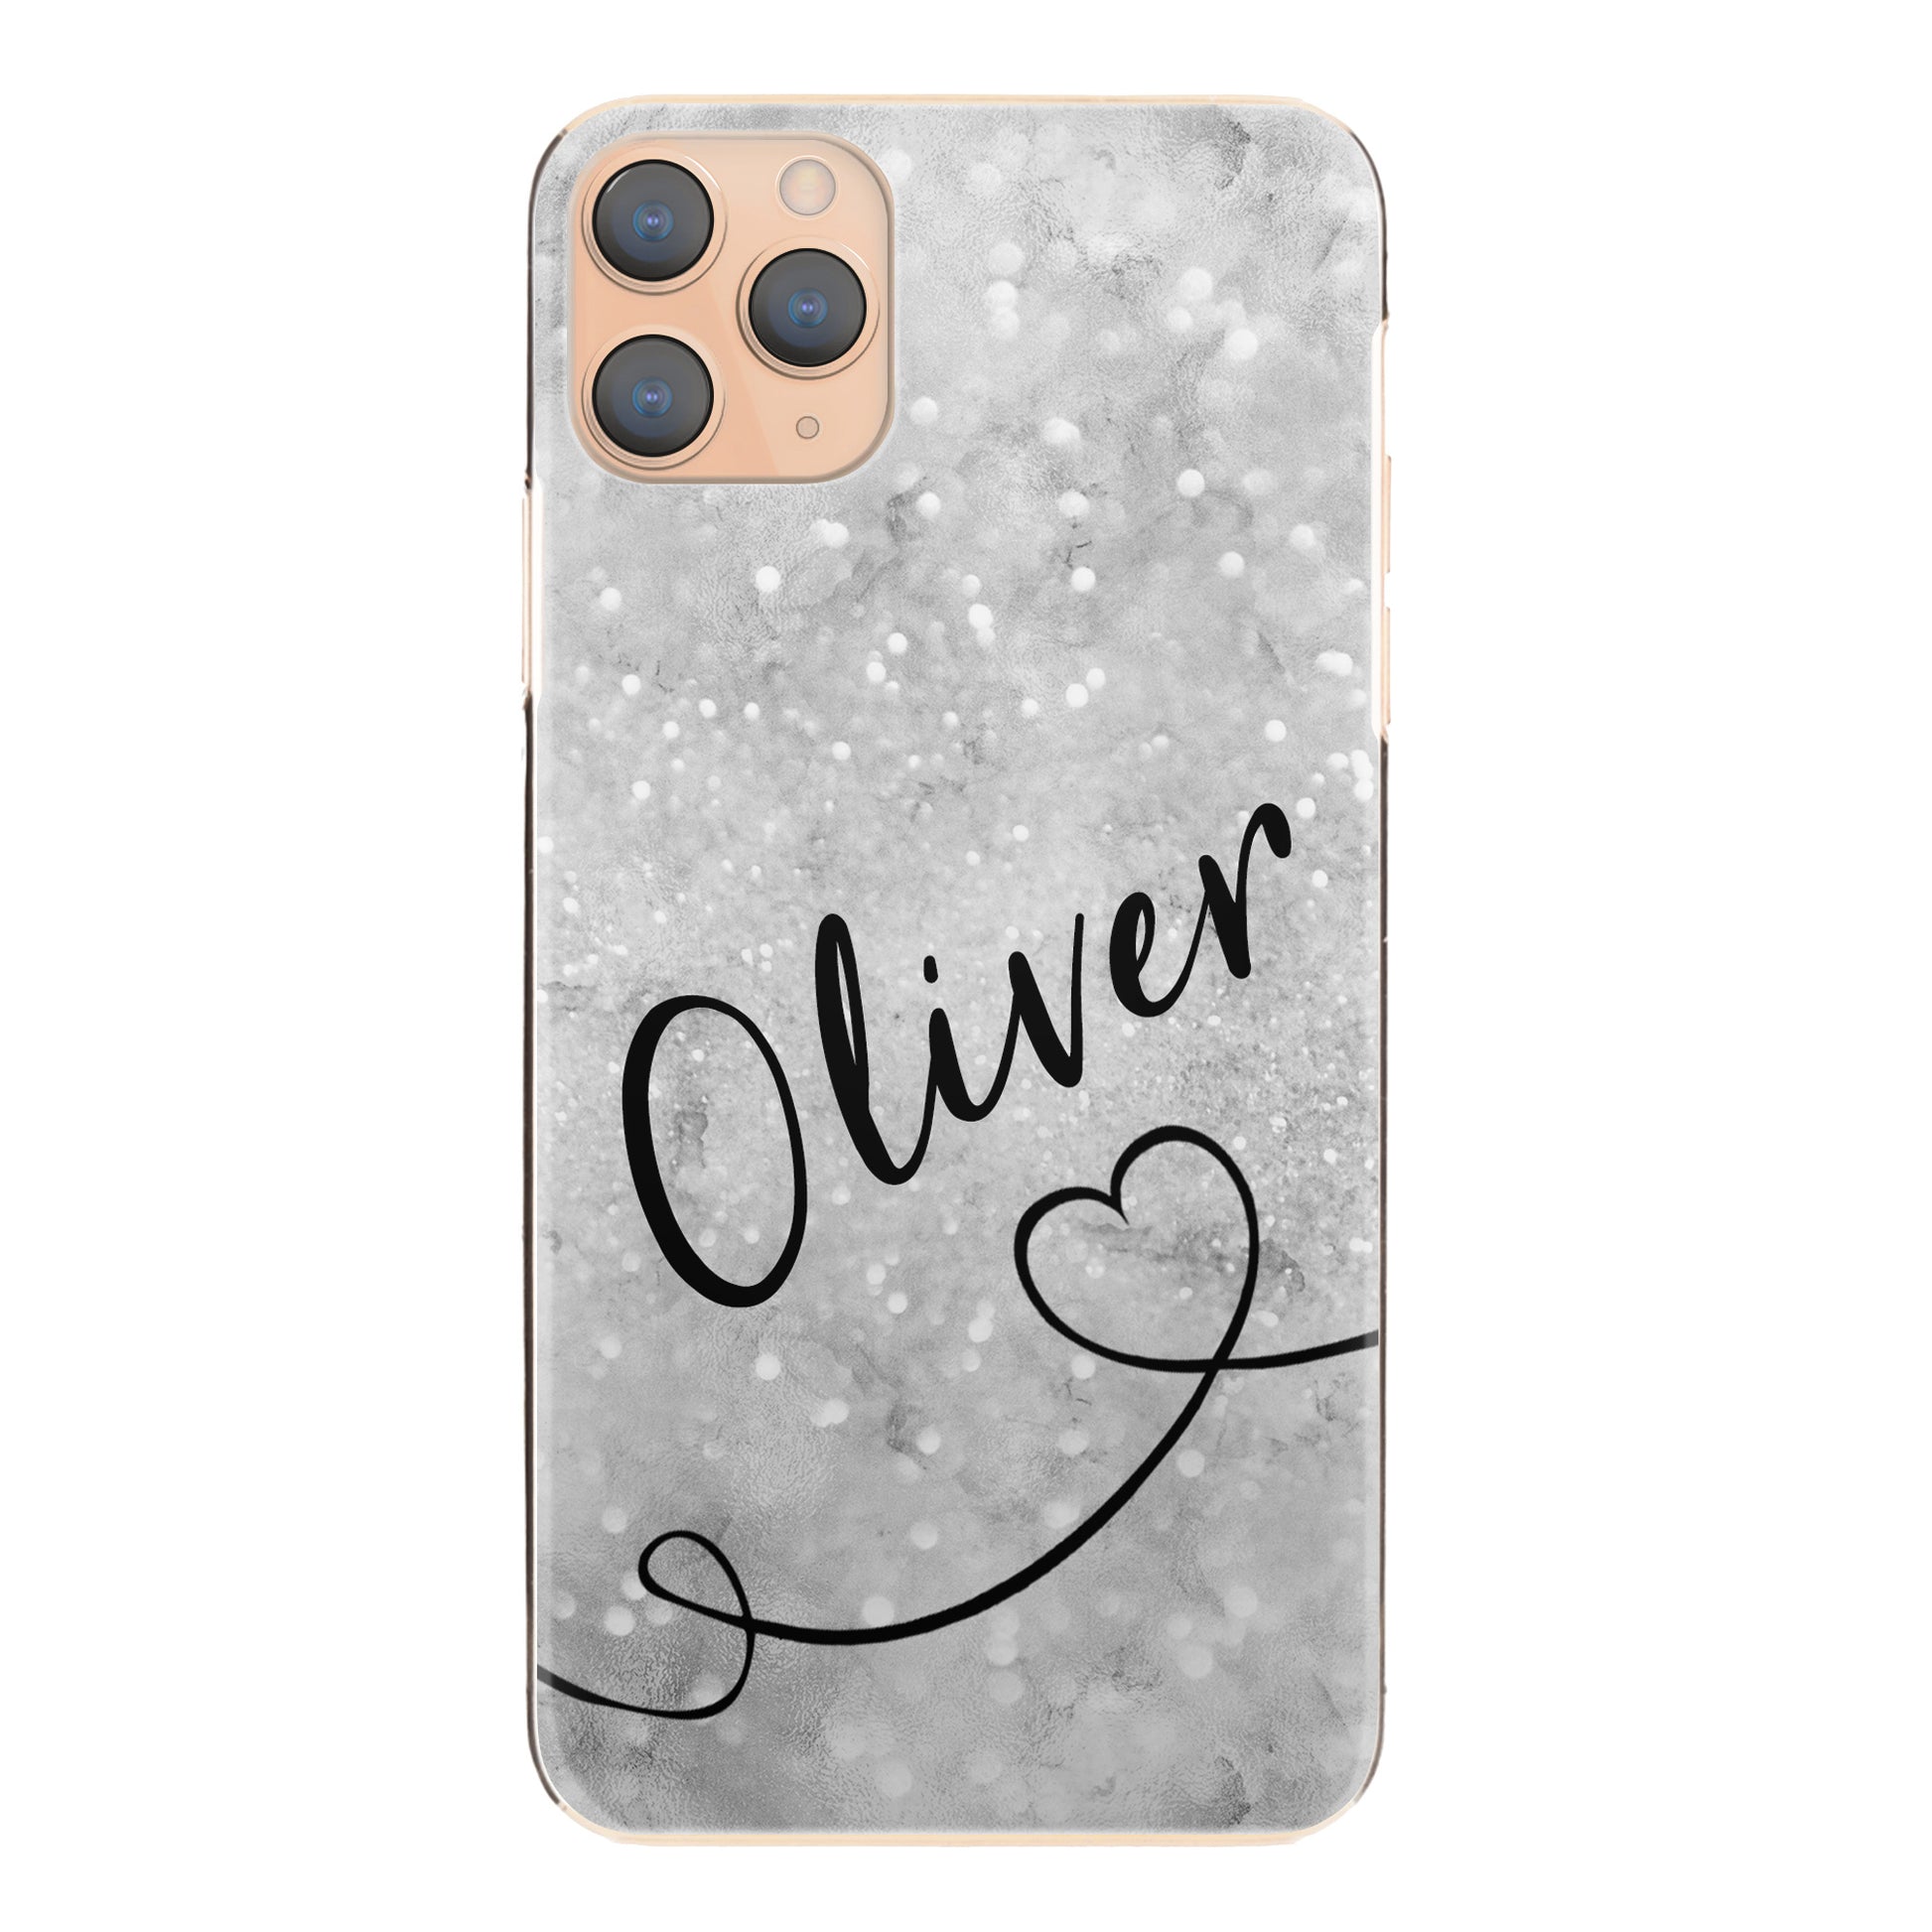 Personalised Oppo Phone Hard Case with Stylish Text and Heart Line on Textured Grey